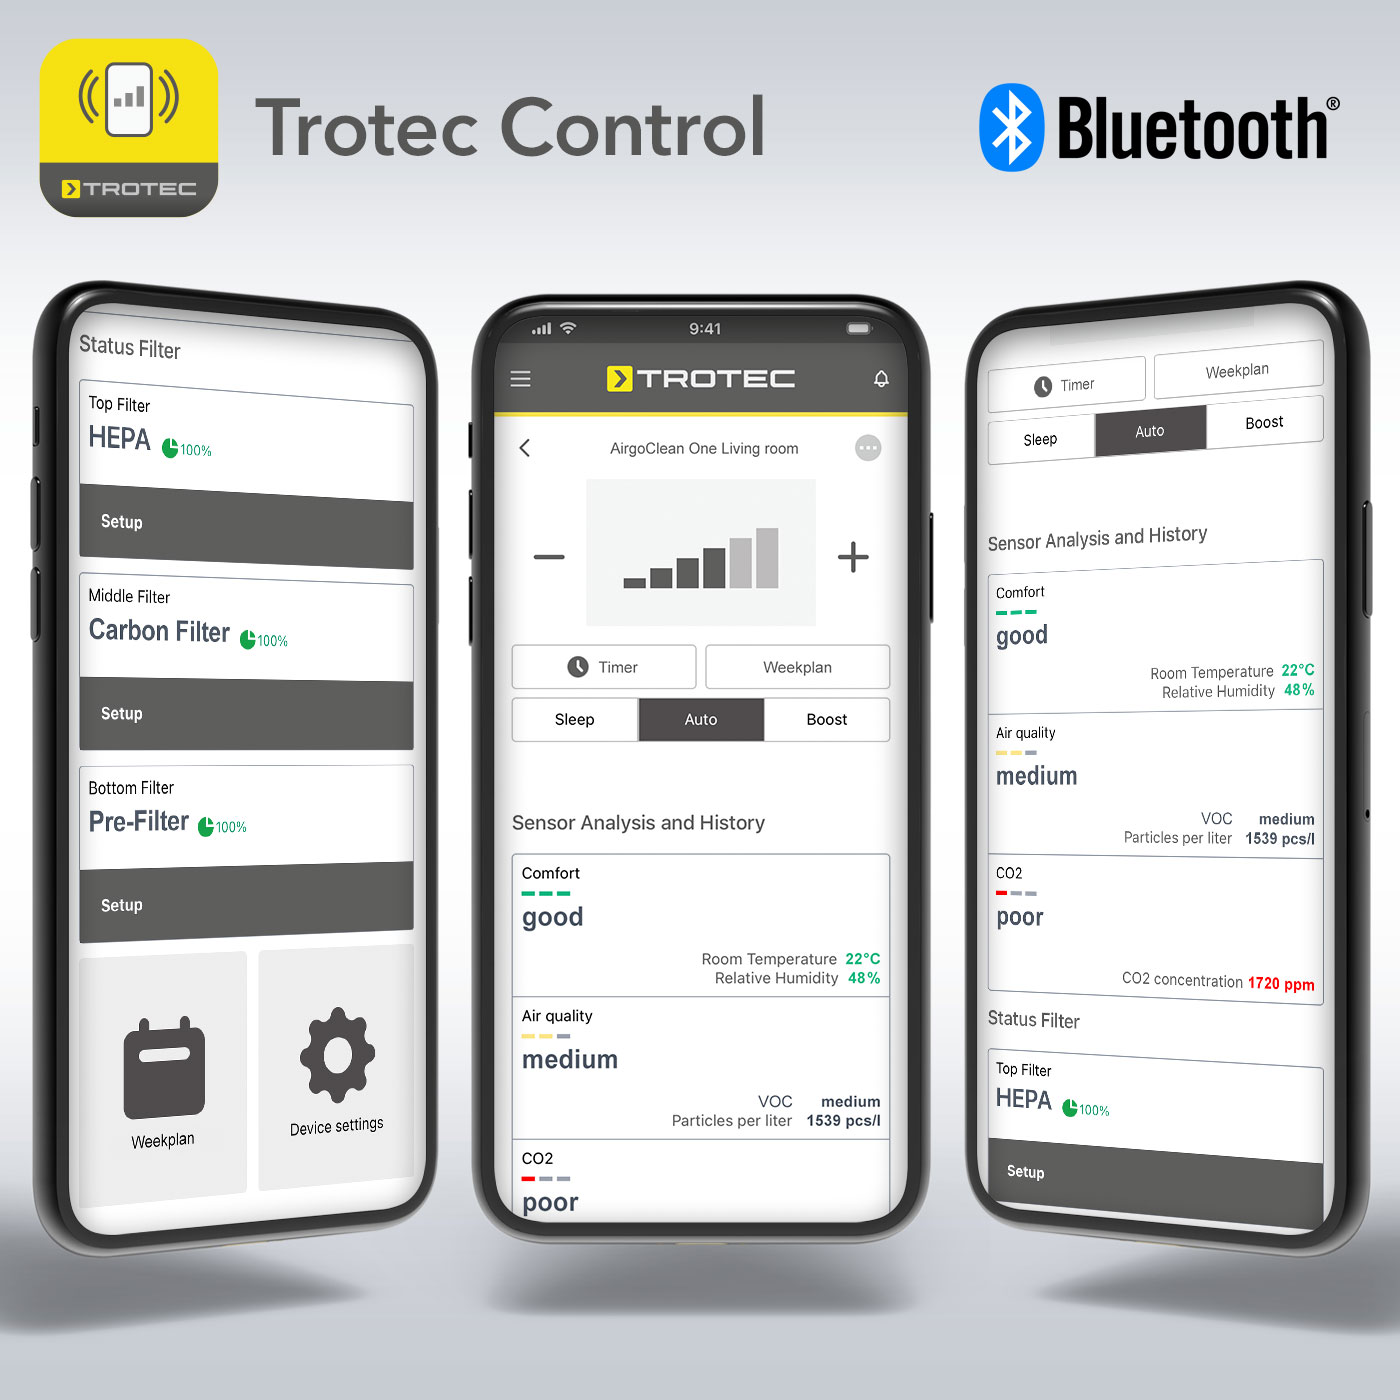 Whether you require device control, room air quality control or you wish to retrieve the filter status – all this can be controlled conveniently and easily via Trotec-Control app